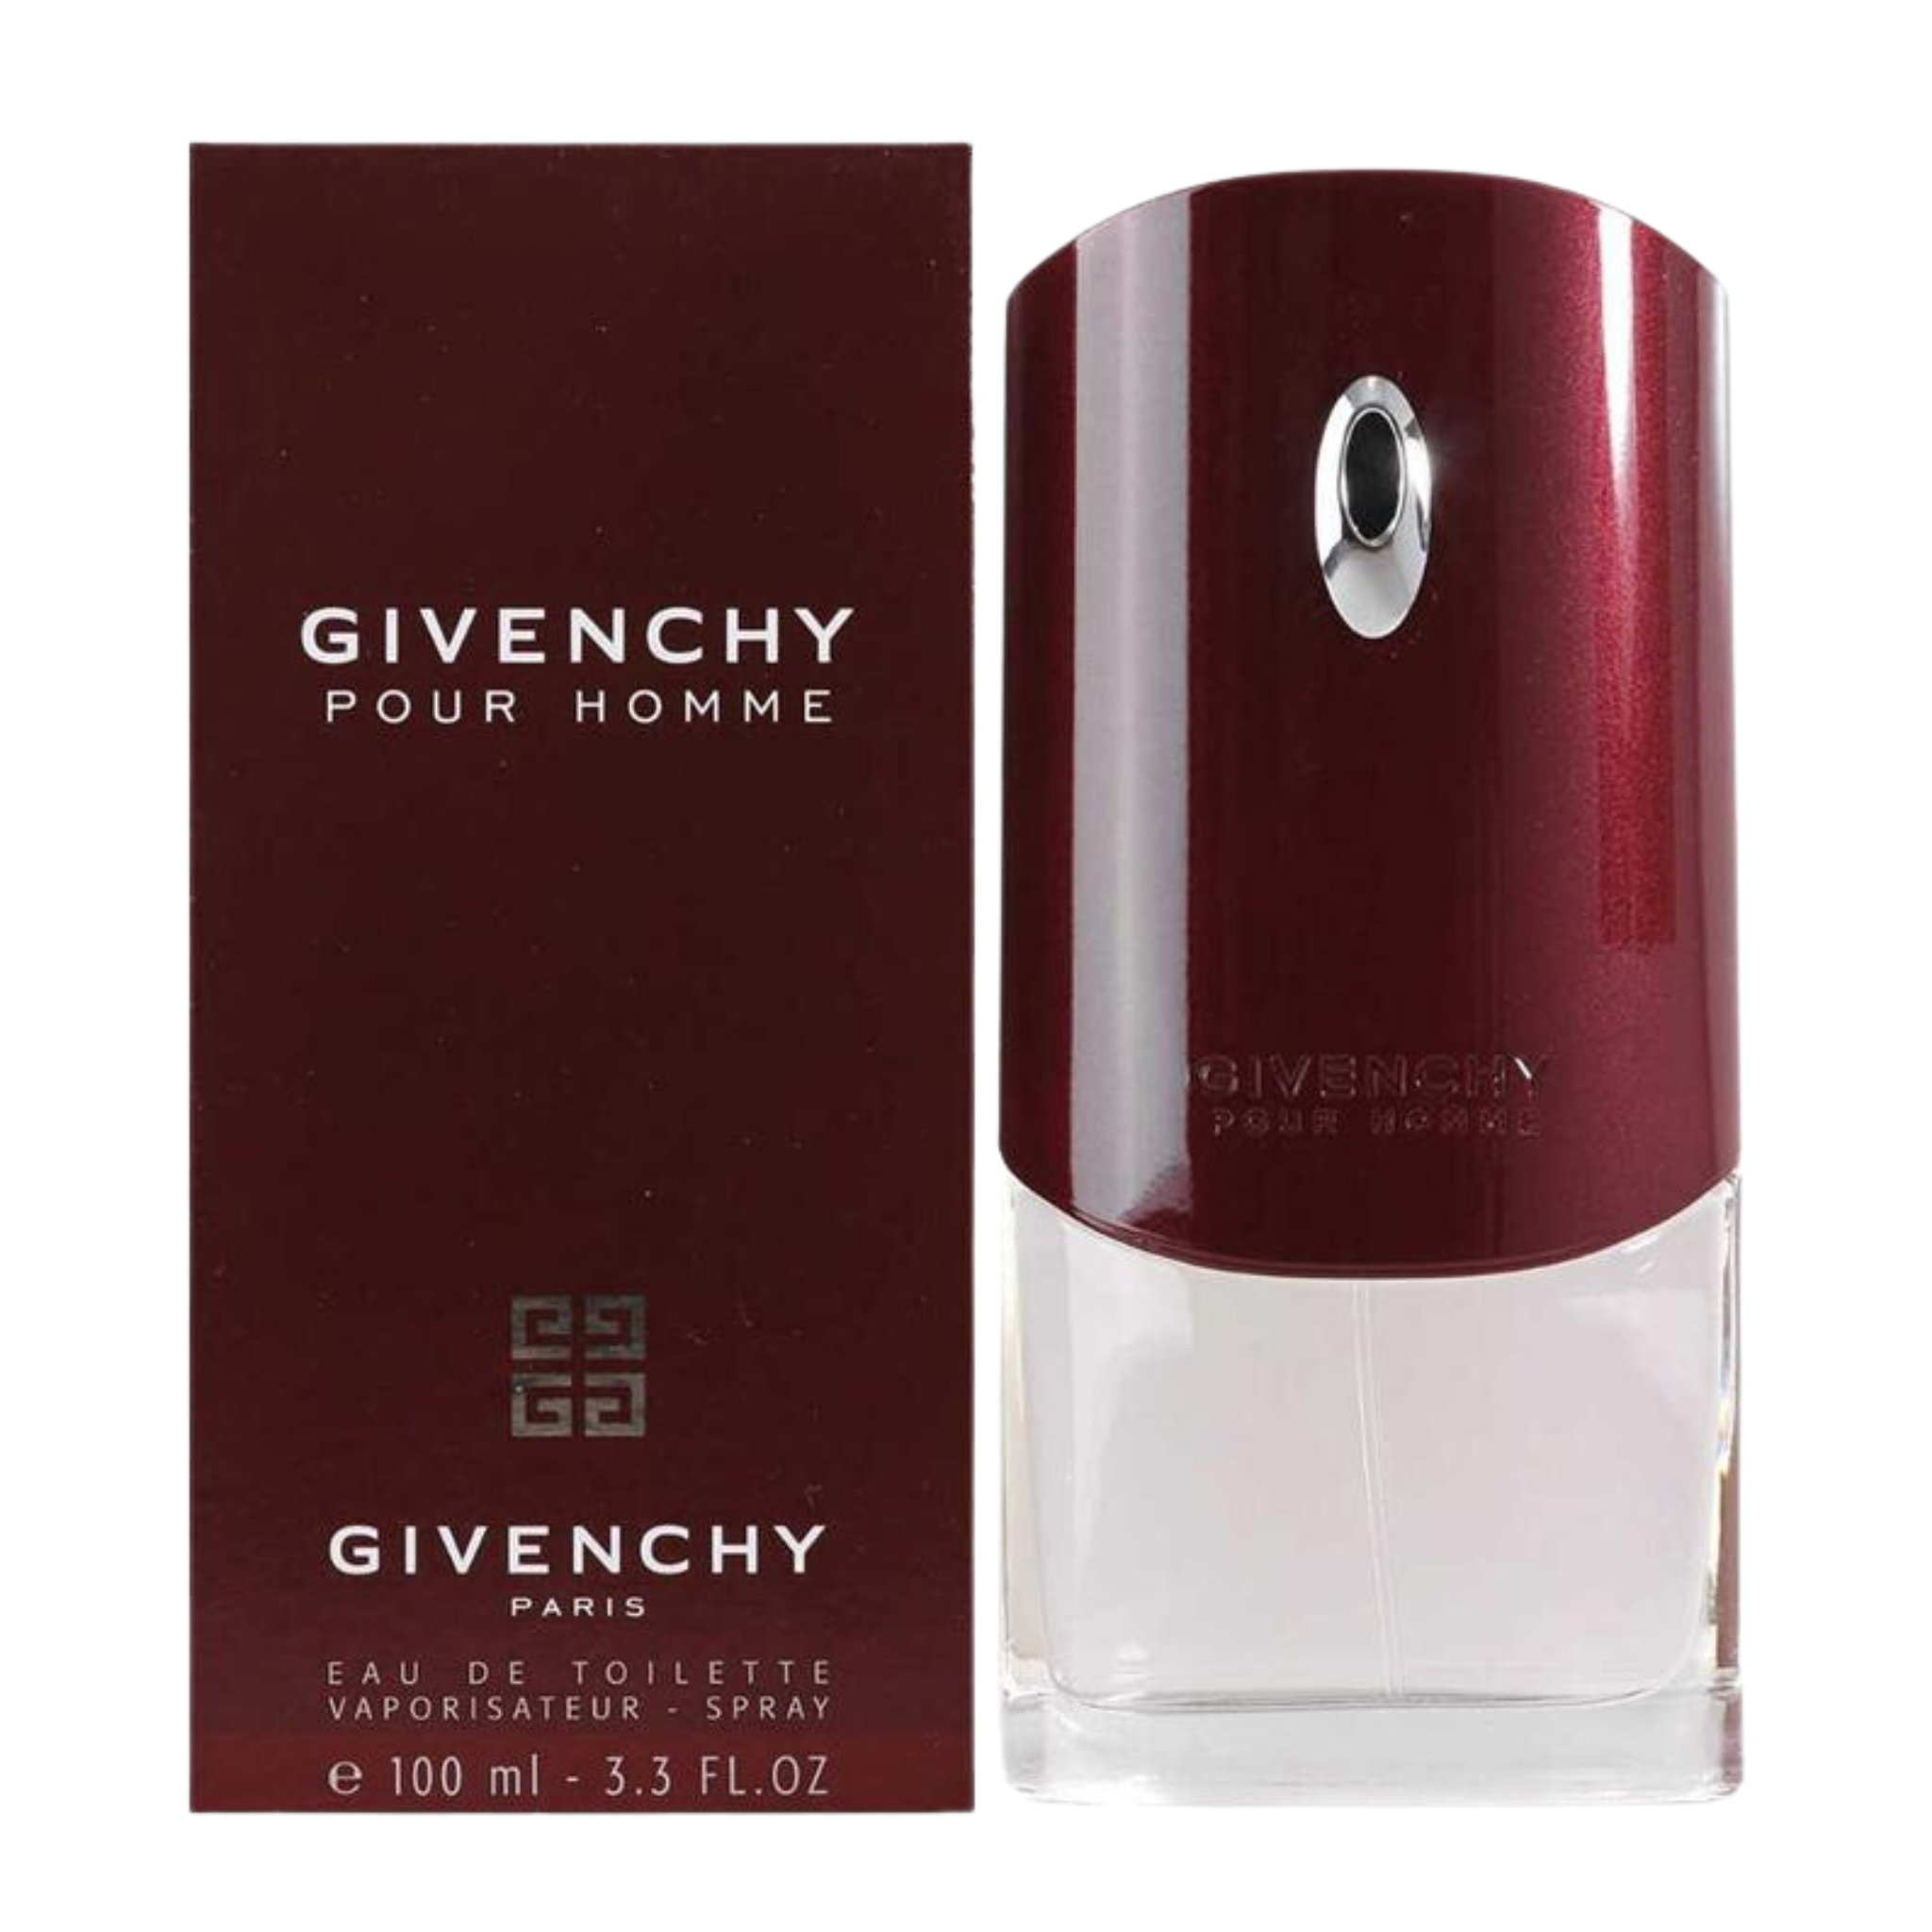 Живанши мужские летуаль. Givenchy "pour homme" EDT, 100ml. Givenchy pour 100 ml. Givenchy pour homme Givenchy. Givenchy pour homme m EDT 100 ml.